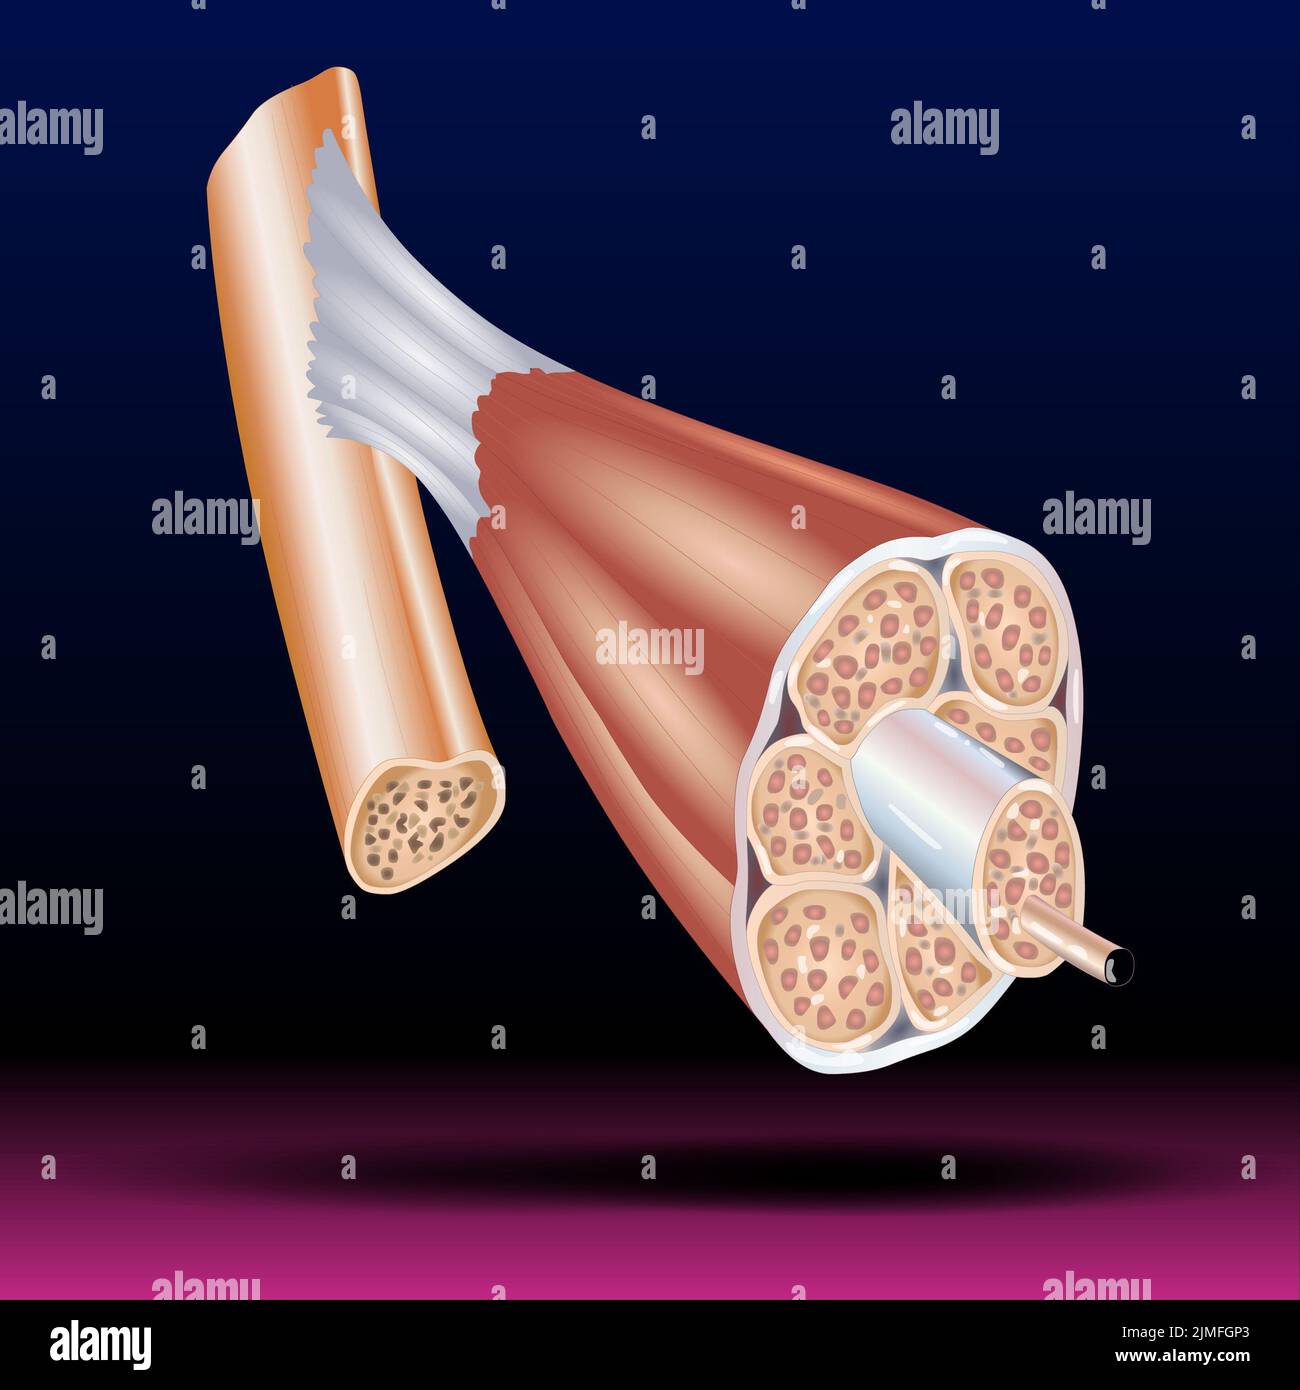 Structure of Skeletal Muscle - Skeletal muscle structure with anatomical inner layers - fascicle, epimysium, endomysium and fibers vector illustration Stock Photo